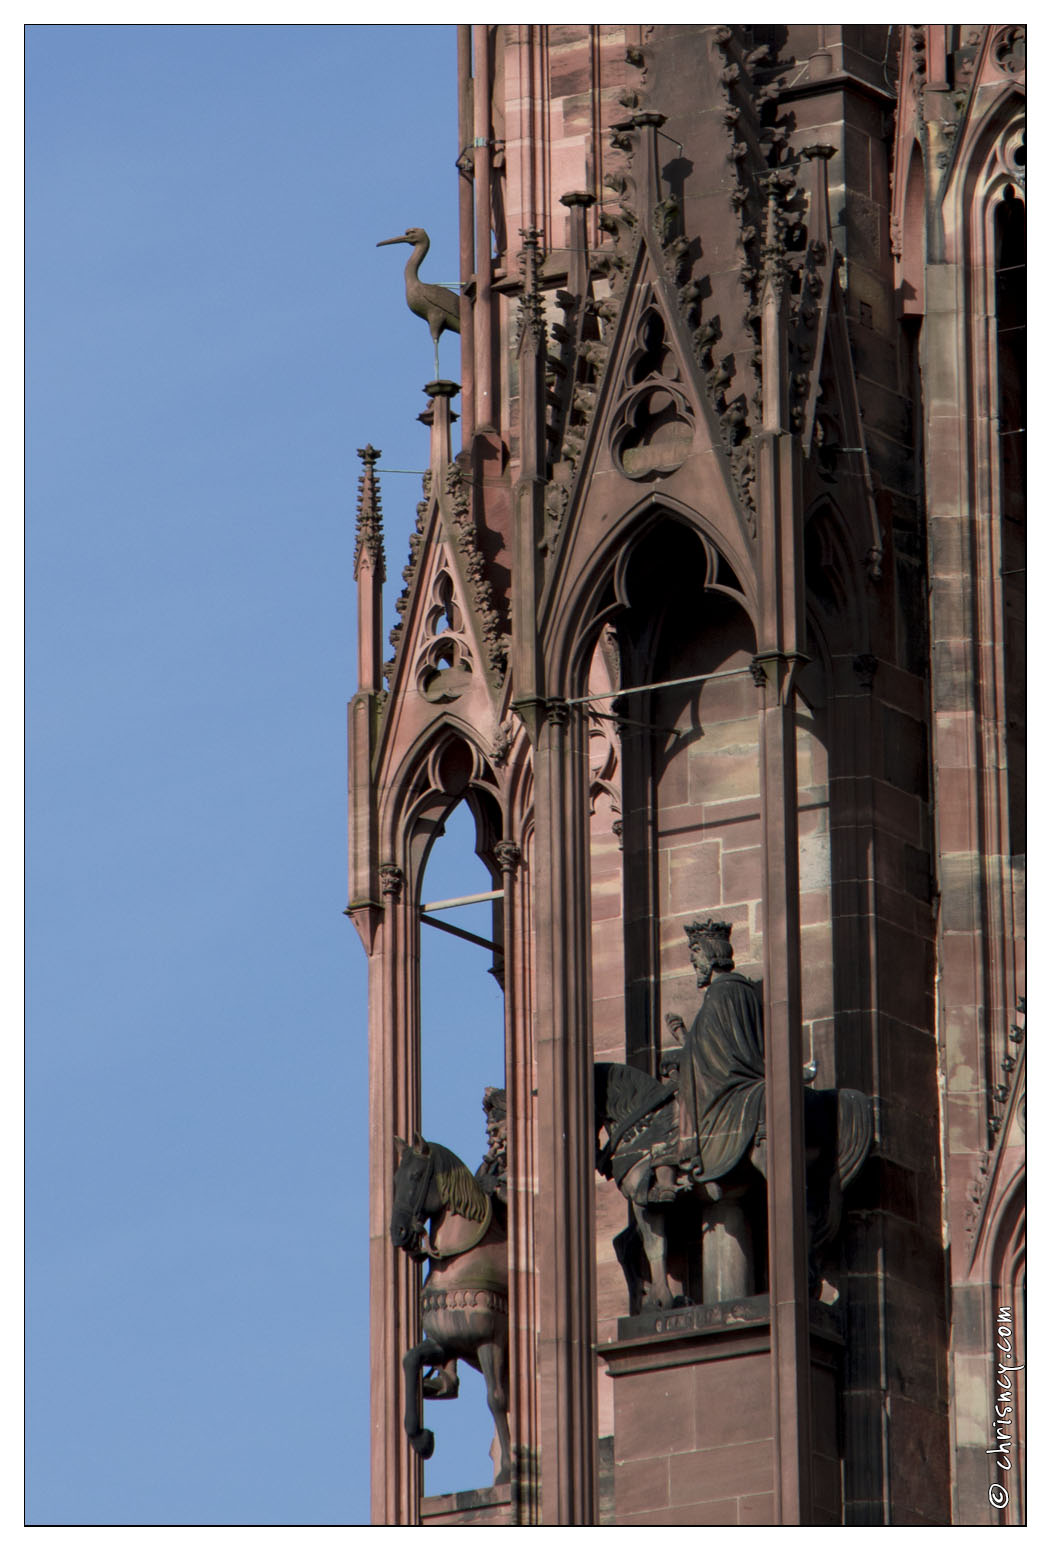 20140311-23_3618-Strasbourg-place_cathedrale.jpg